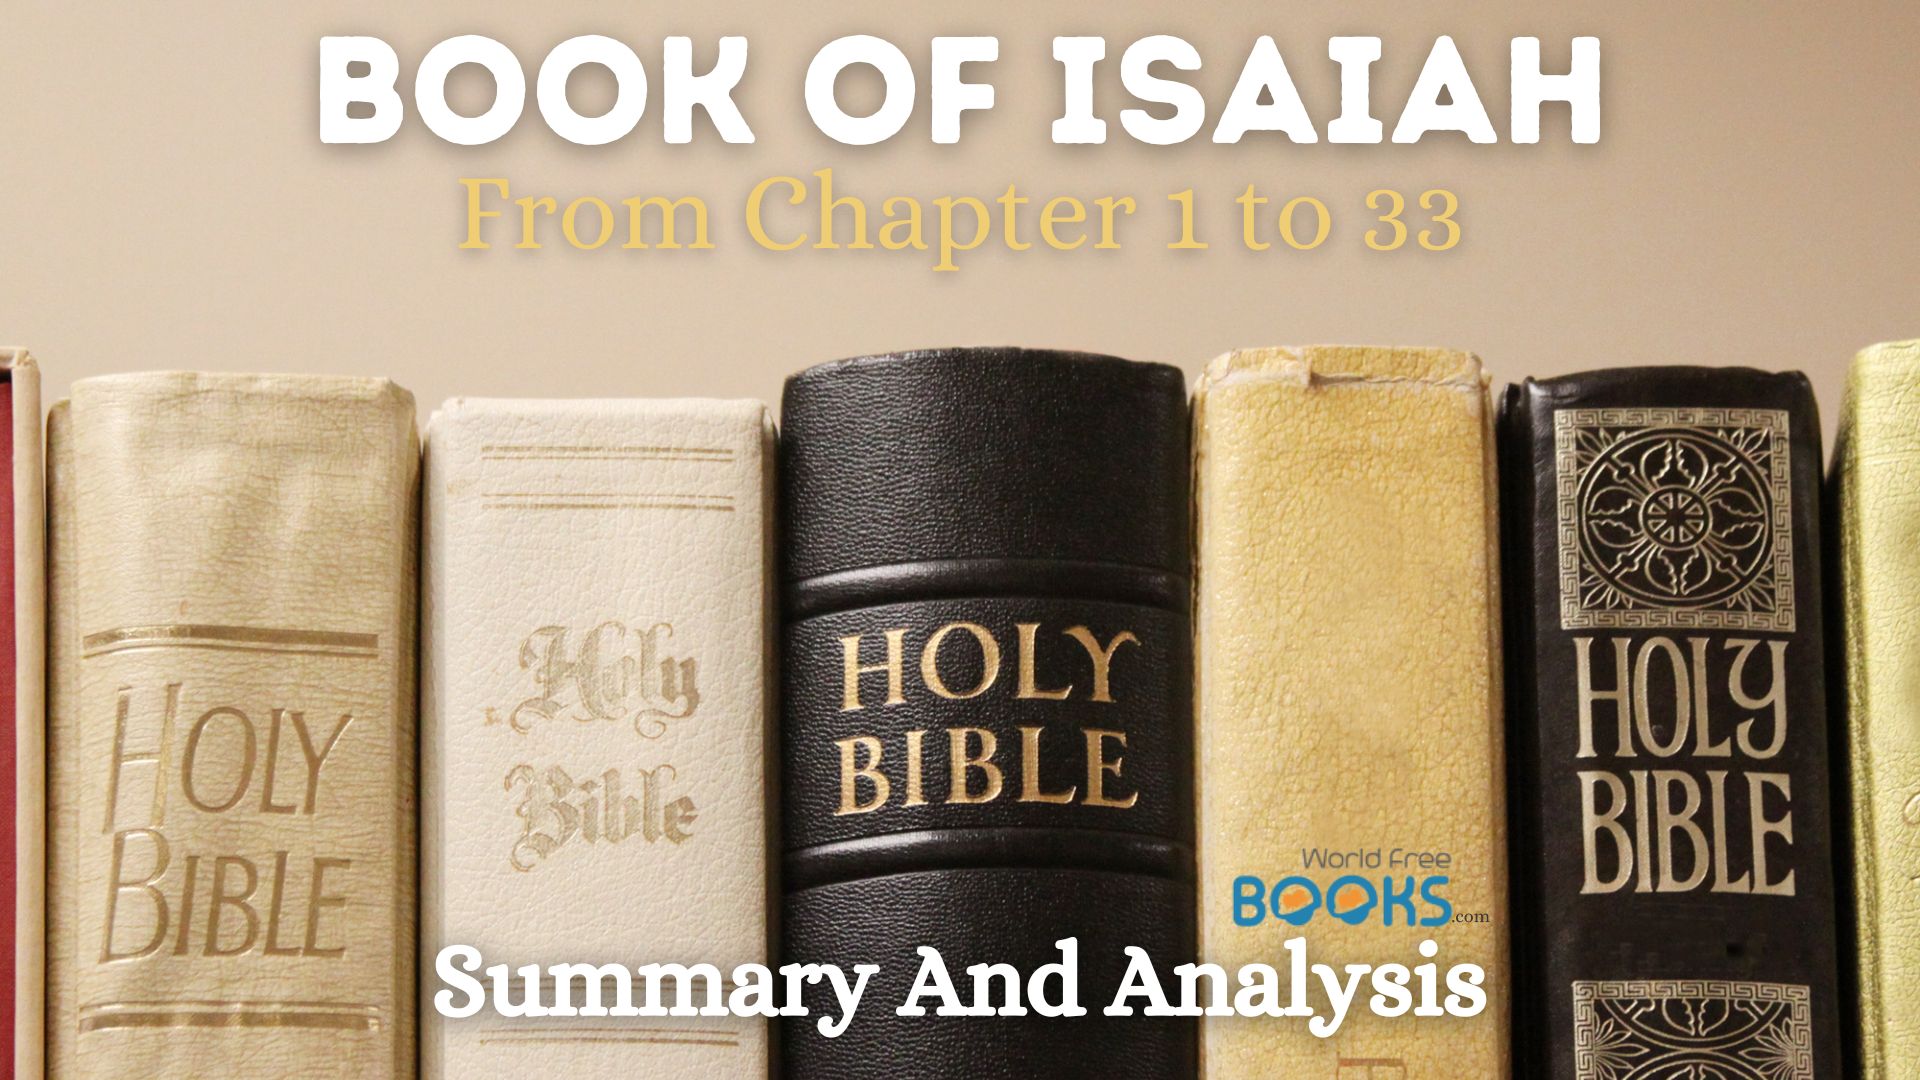 Book of Isaiah Summary And Analysis